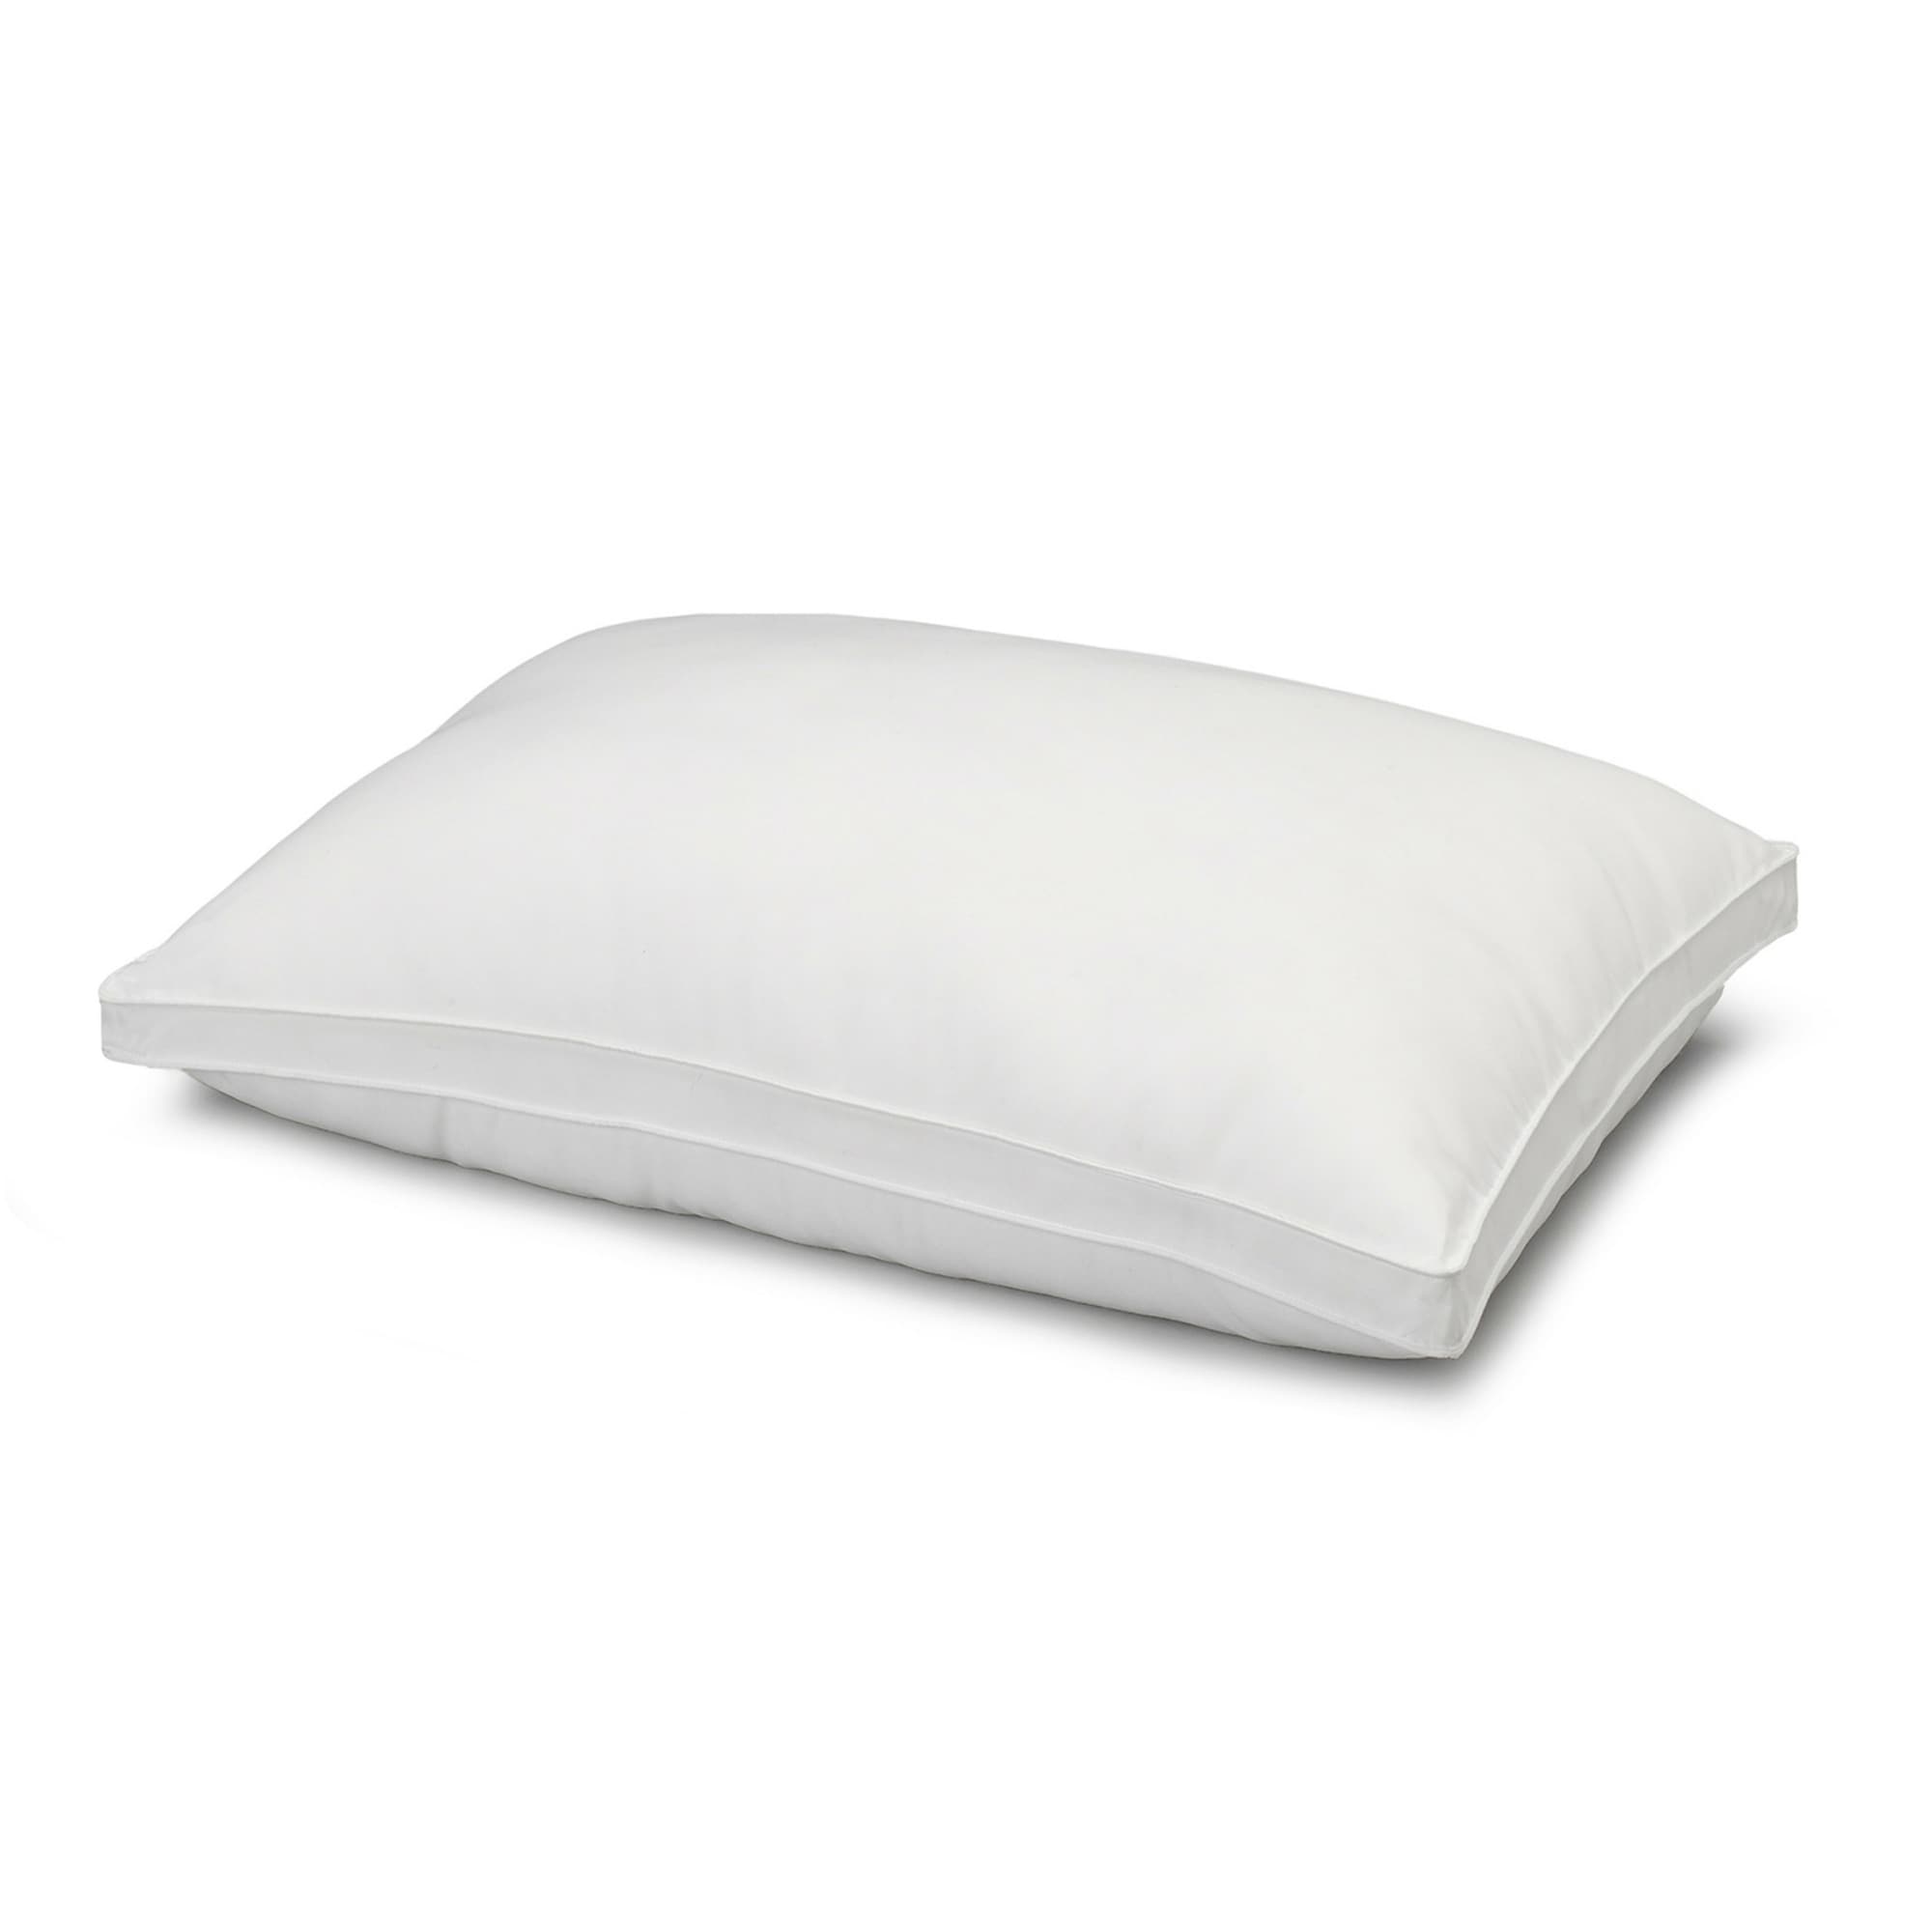 2-Pack Cotton Pillows Gusseted Pillows for Side, Stomach and Back Sleeper -  Bed Bath & Beyond - 33113258